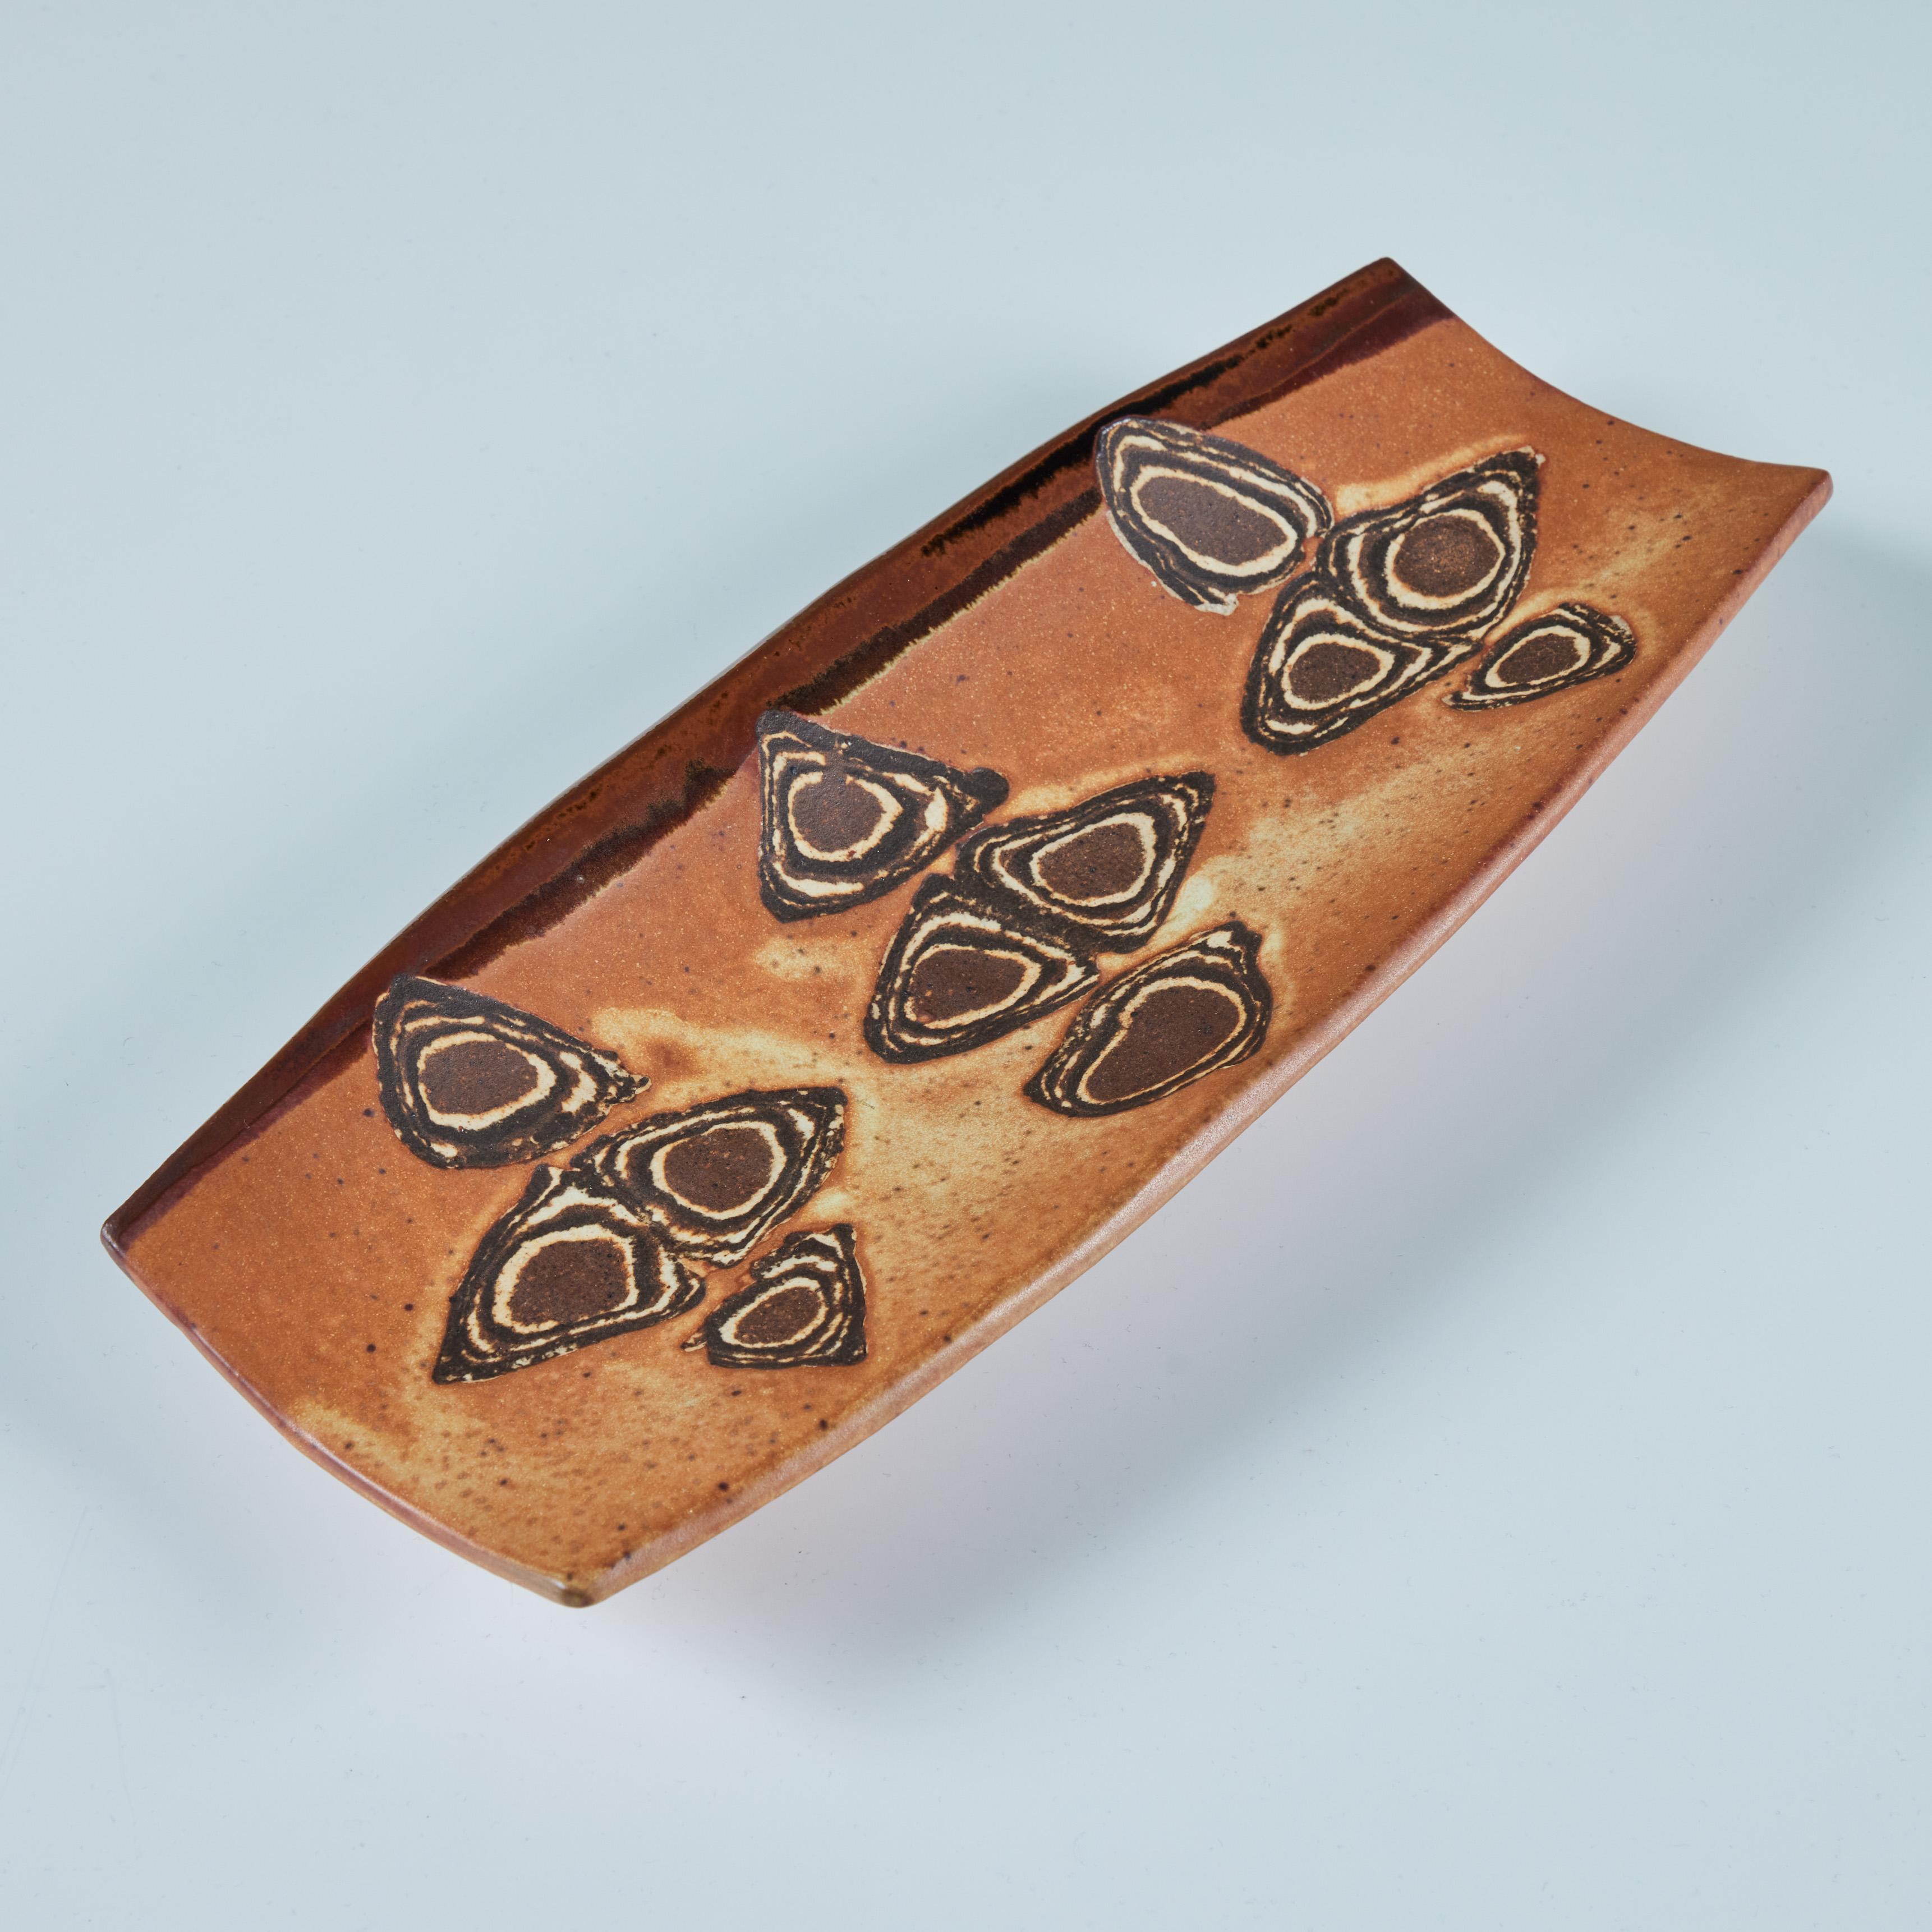 Stoneware plate features a rectangular shape with turned two curled sides. The plate is glazed in burnt orange and brown tones with speckling throughout. The piece has a three geometric design depicting triangles and diamonds. It rests on three